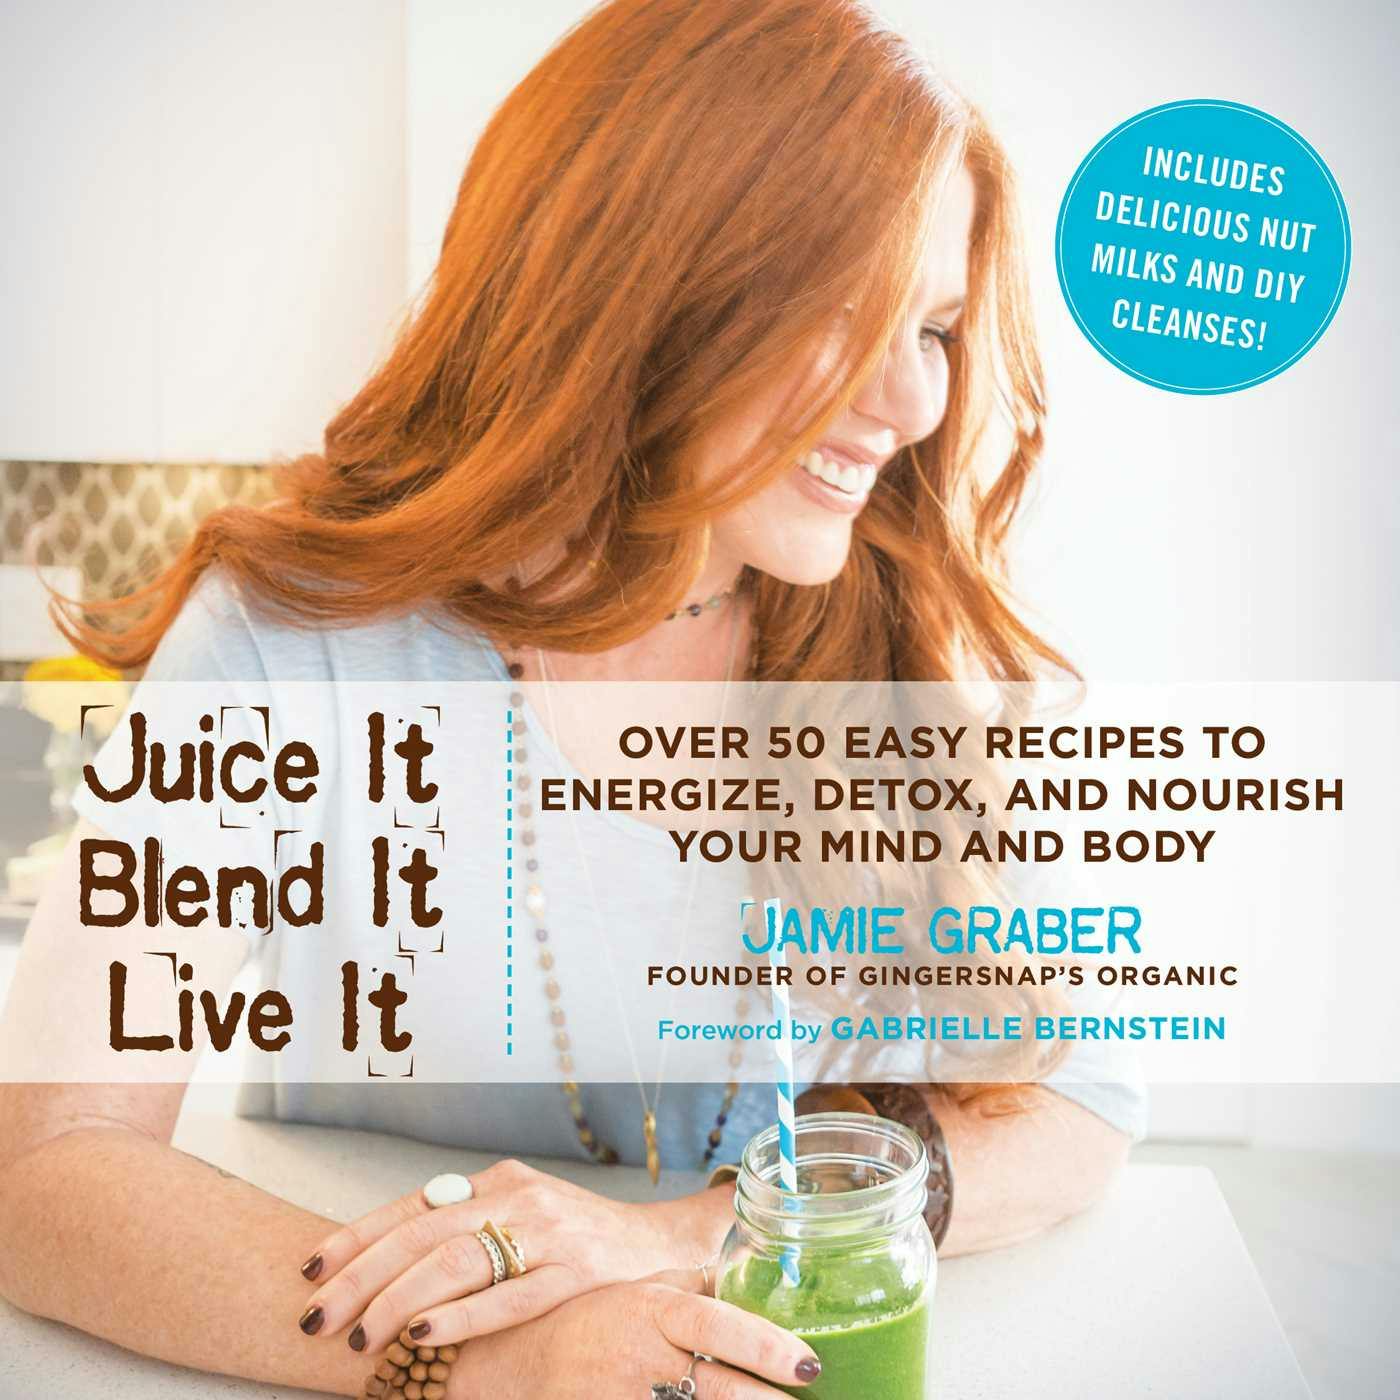 Juice It, Blend It, Live It: Over 50 Easy Recipes to Energize, Detox, and Nourish Your Mind and Body - Jamie Graber